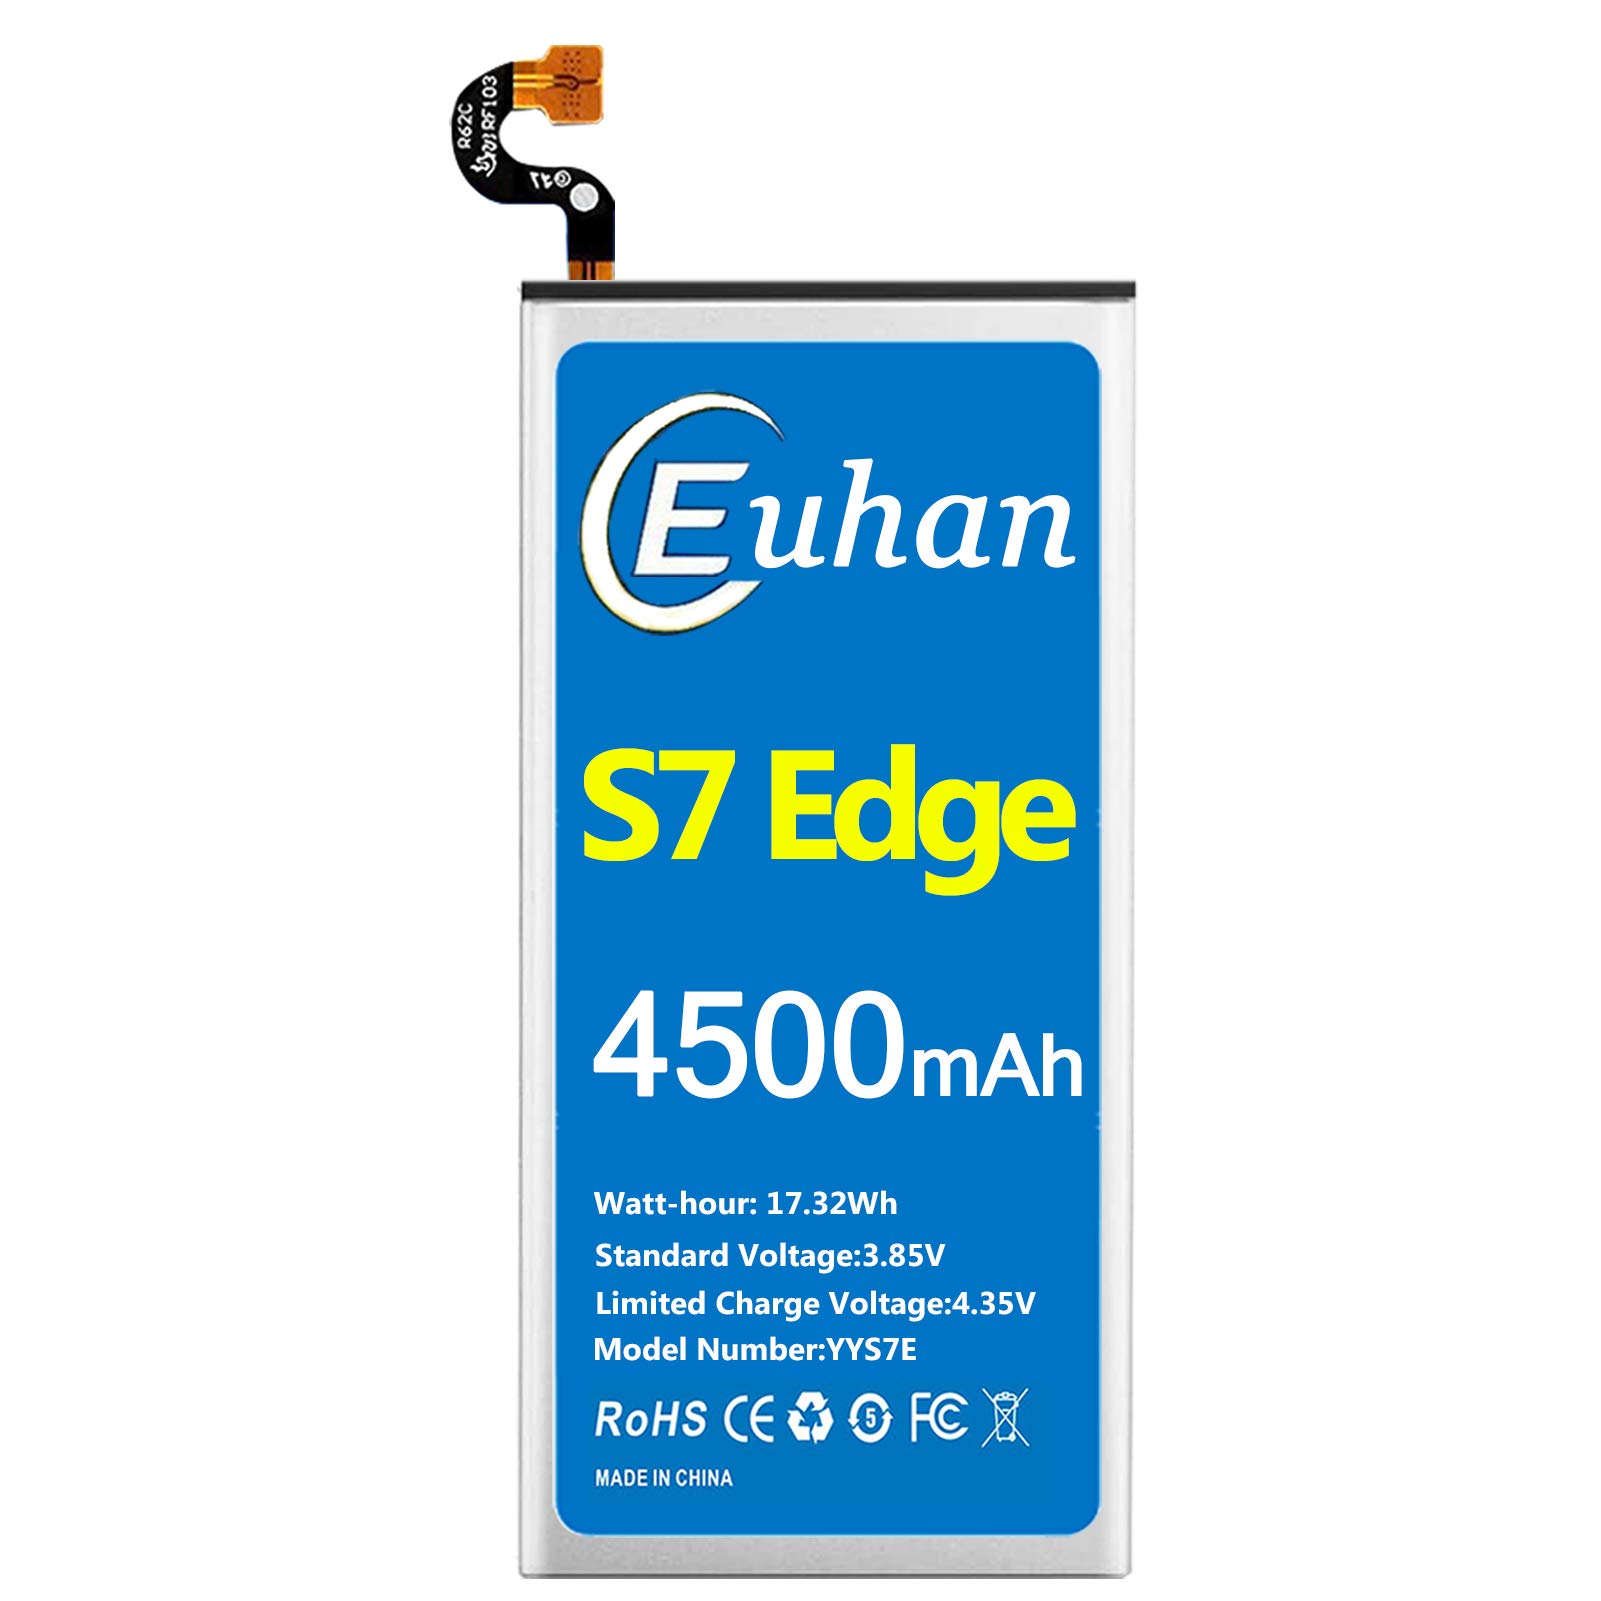 Galaxy S7 Edge Battery, [Upgraded] Euhan 4500mAh Li-Polymer EB-BG935ABE Replacement Battery for Samsung Galaxy S7 Edge SM-G935 G935V, G935T,G935A,G935P with Repair Tools Kit [24 Month Service]